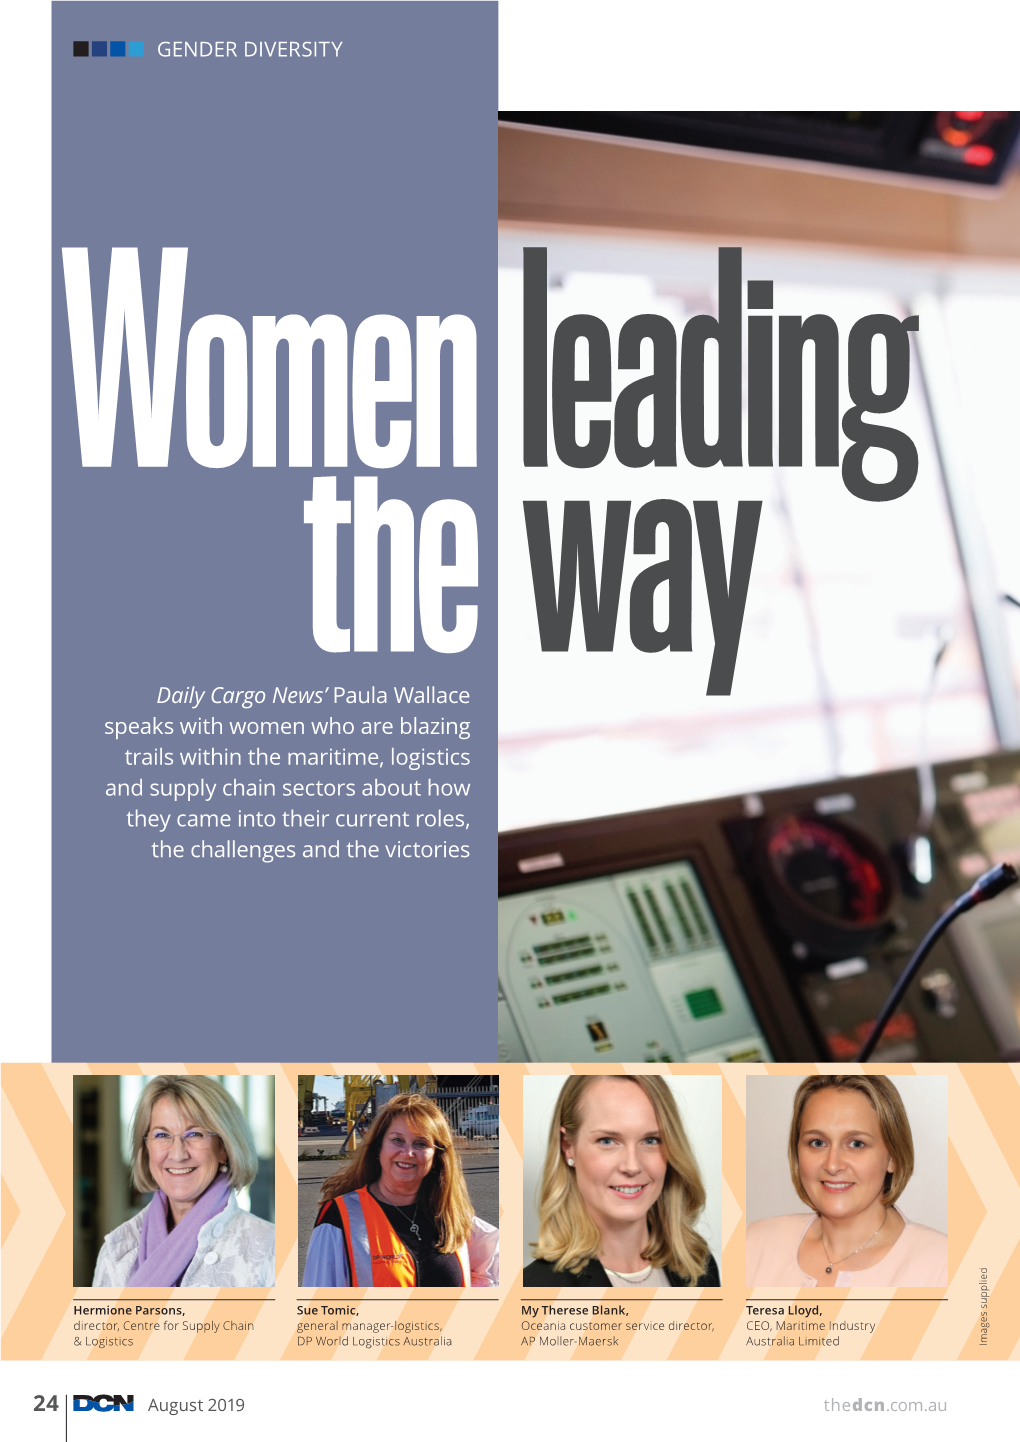 24 Daily Cargo News' Paula Wallace Speaks with Women Who Are